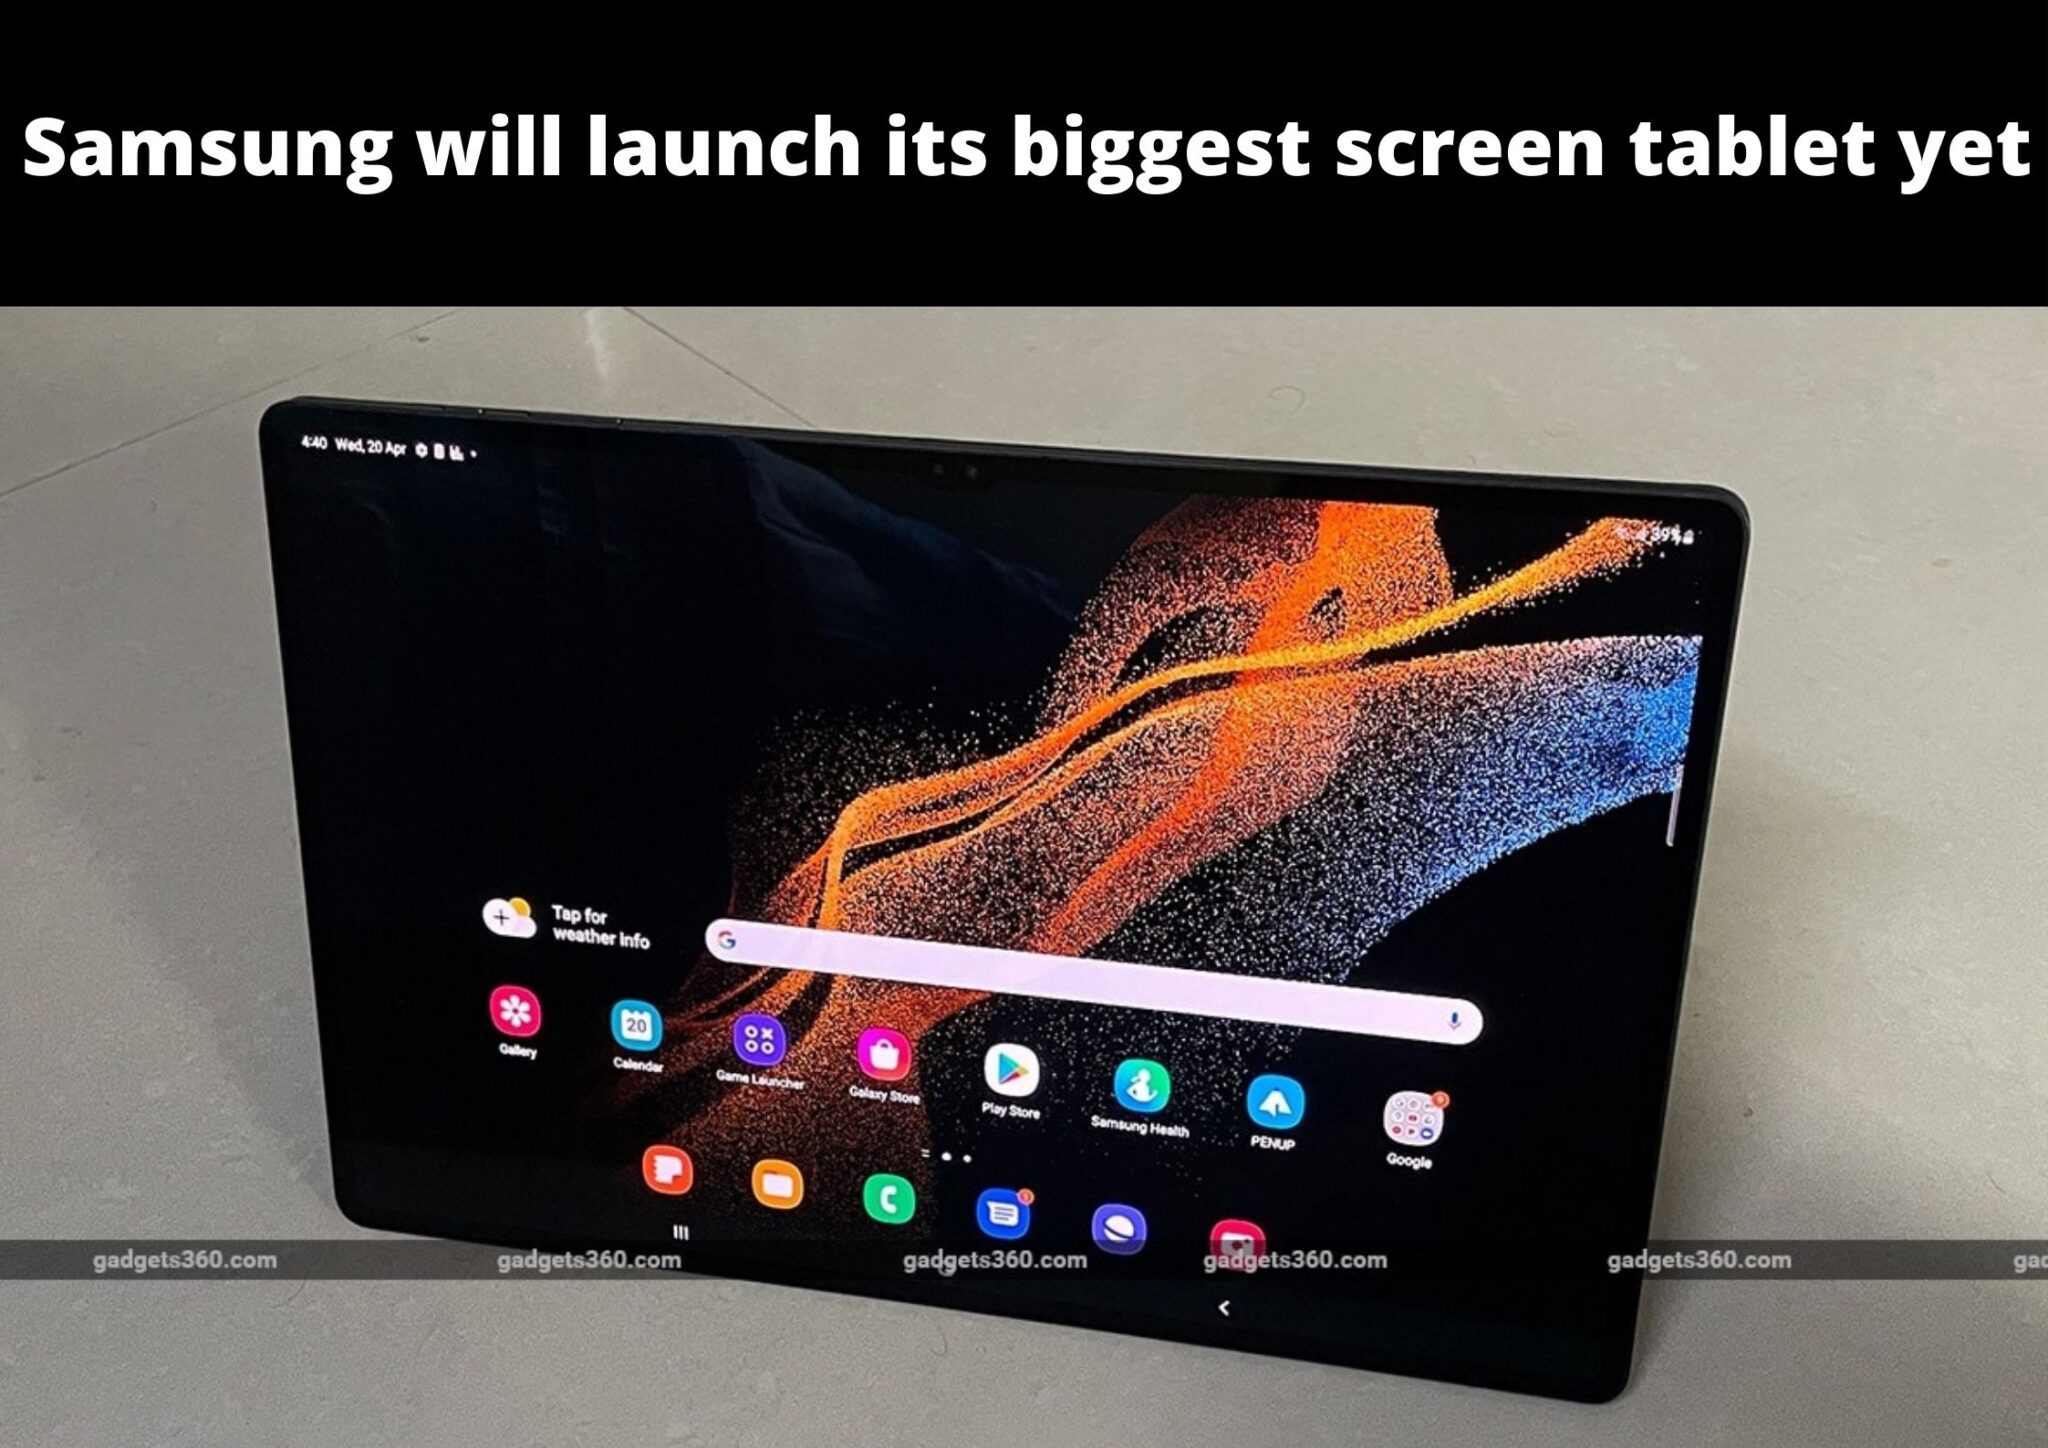 Samsung will launch its biggest screen tablet yet, Know about Best